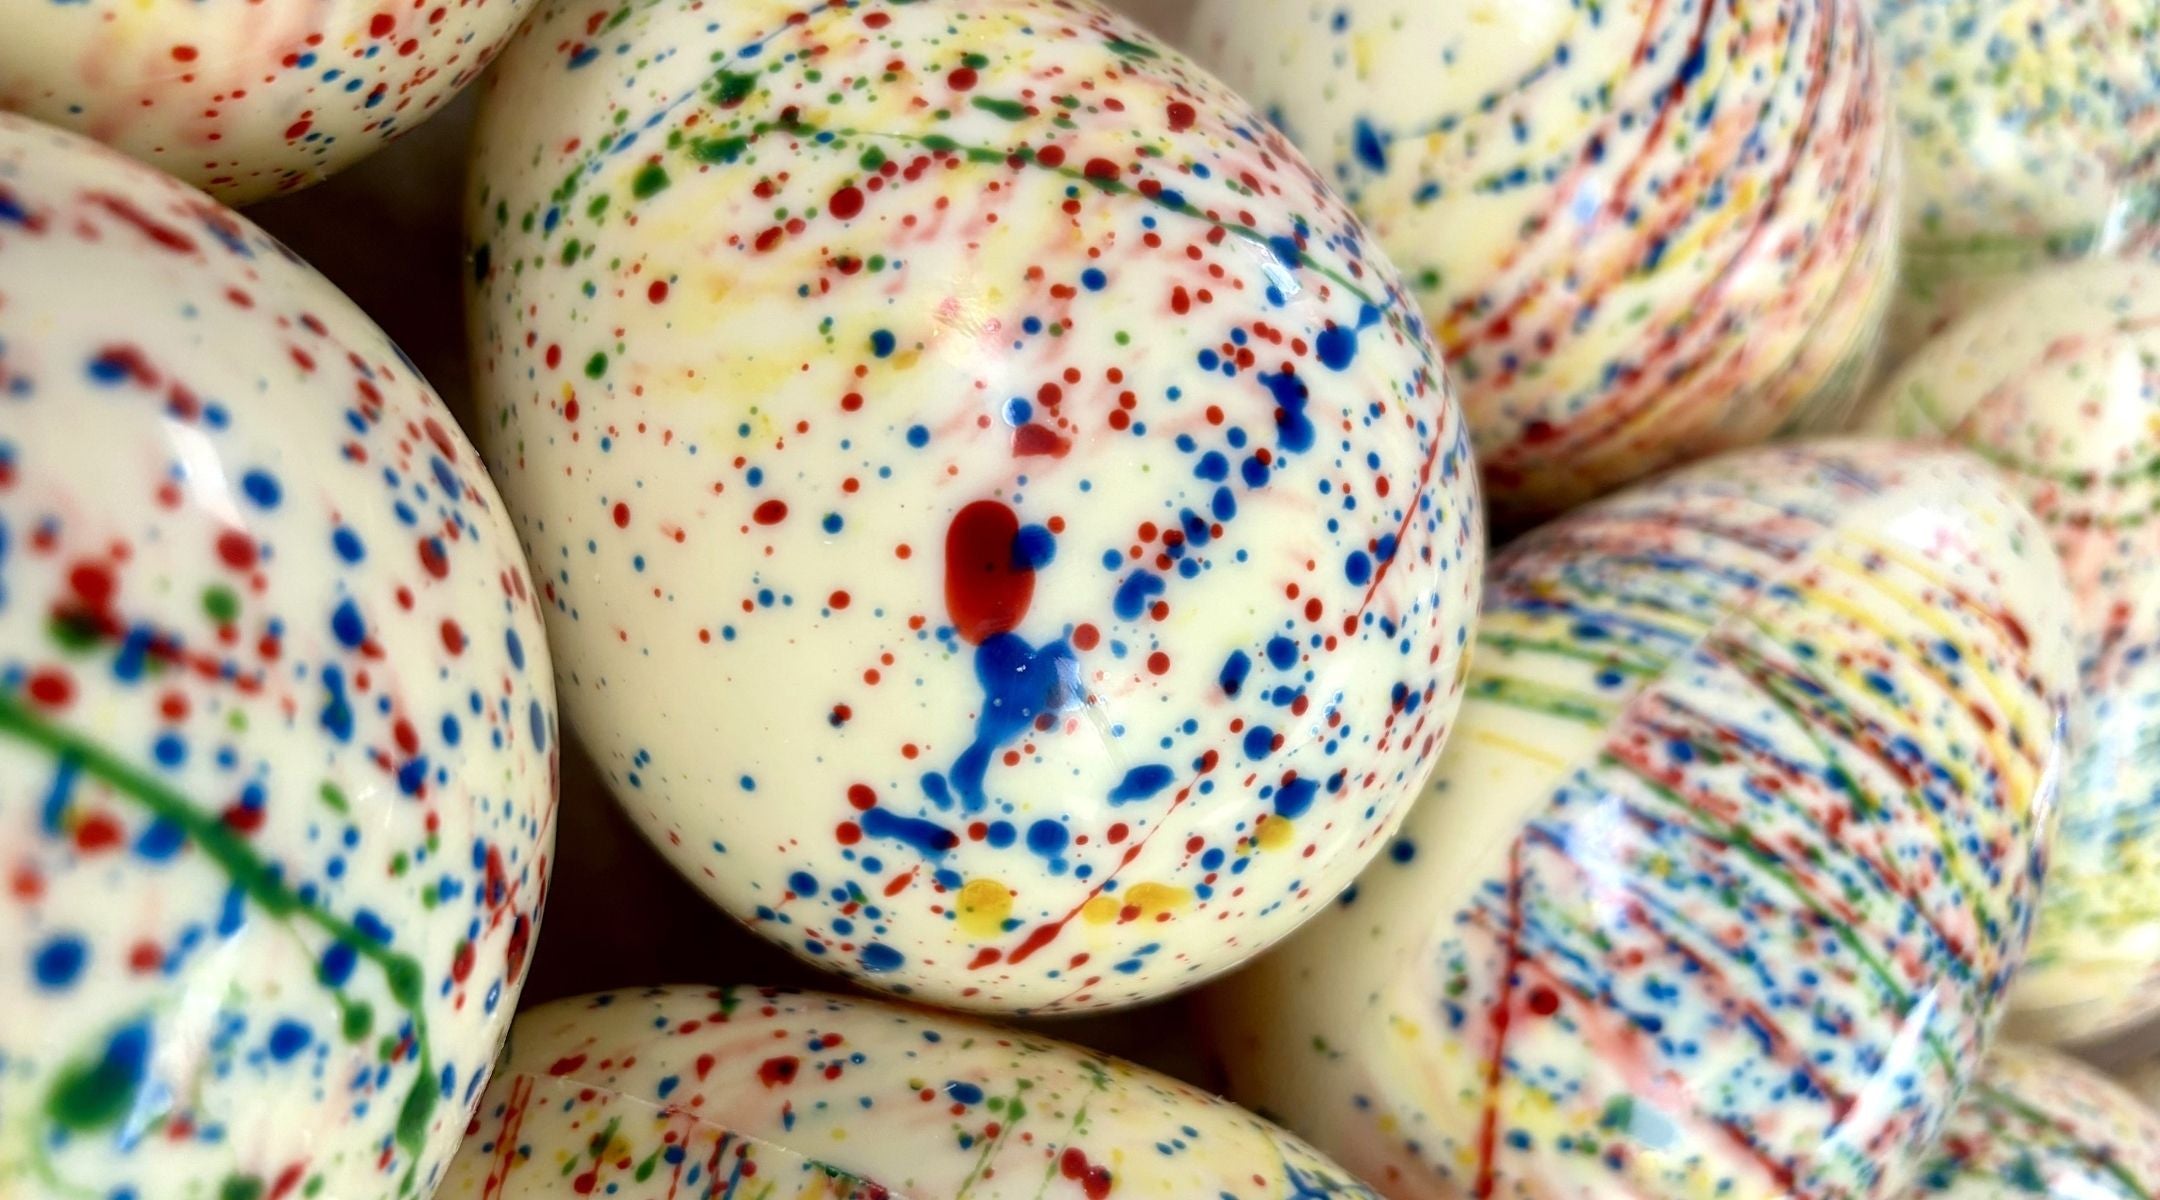 A group of white chocolate Easter eggs decorated with rainbow cocoa butter speckles